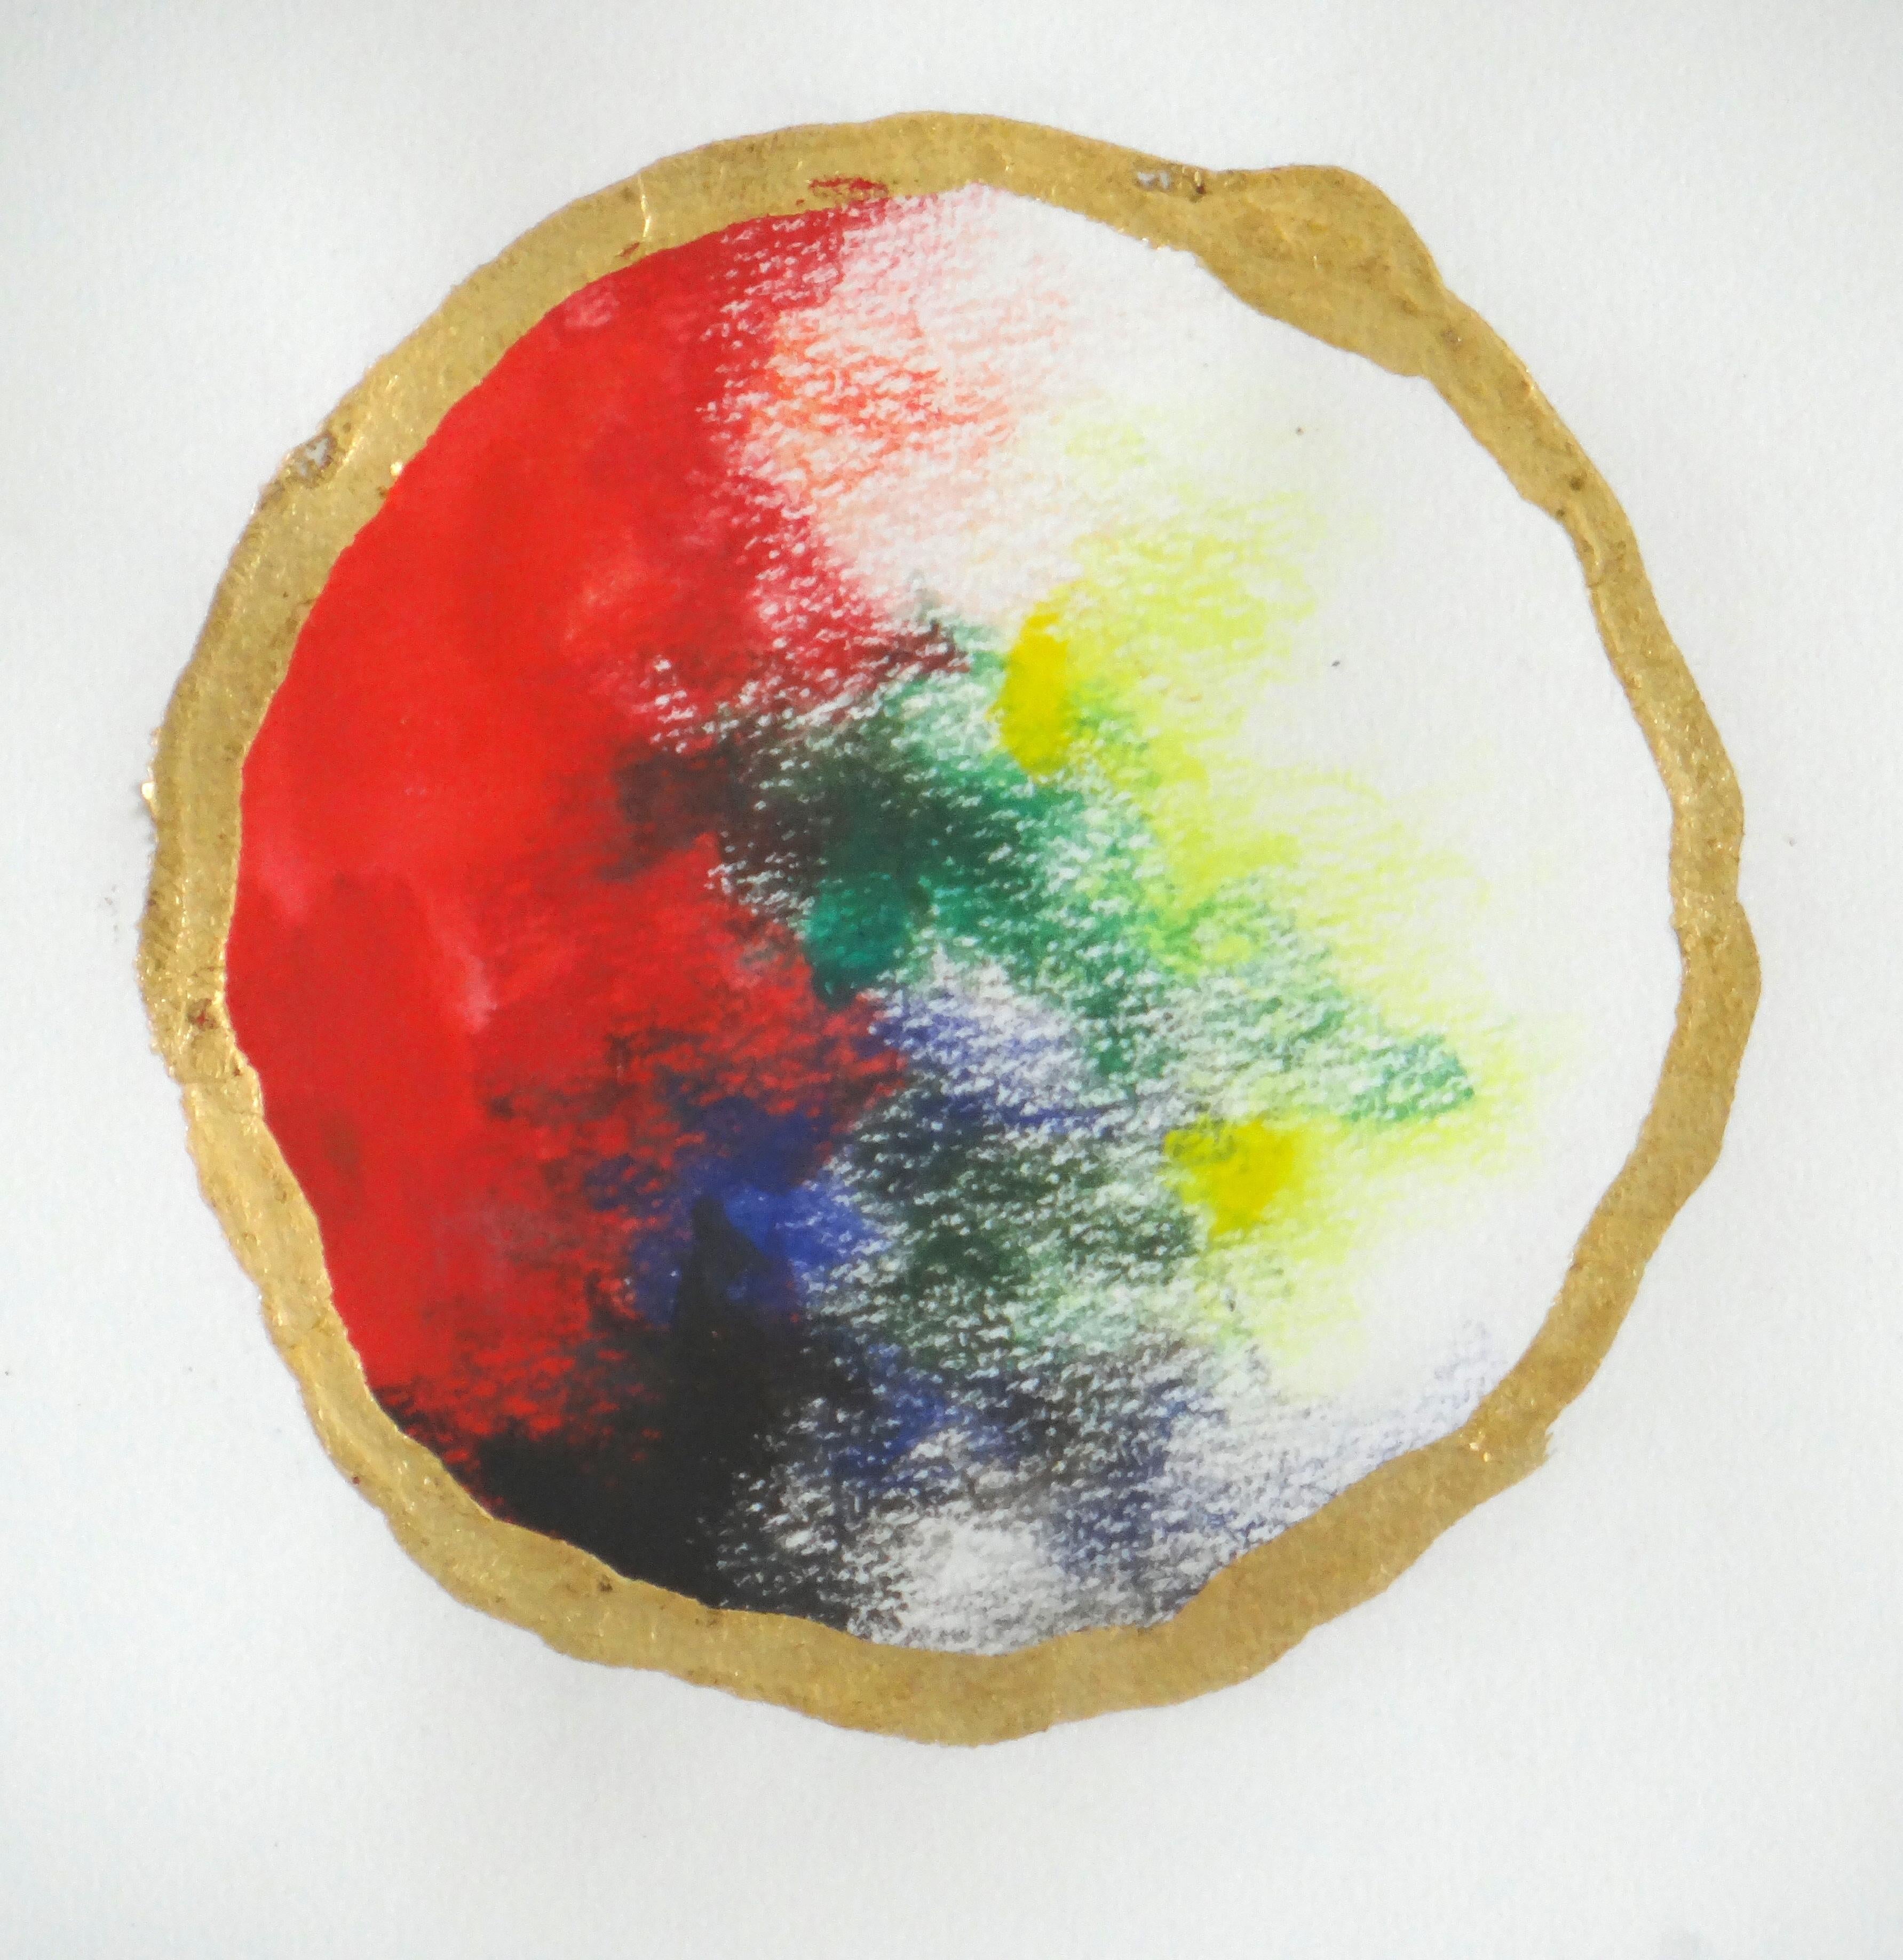 Circle of Life  by Ramon Aular 
Oil paint, watercolor, ink, acrylic paint, 18k gold leaf on paper
Paper Size: 8 in x 6 in
Signed, titled and dated on verso
Framed
2013
_______________________________
Ramon Aular was born in Valencia, Venezuela in